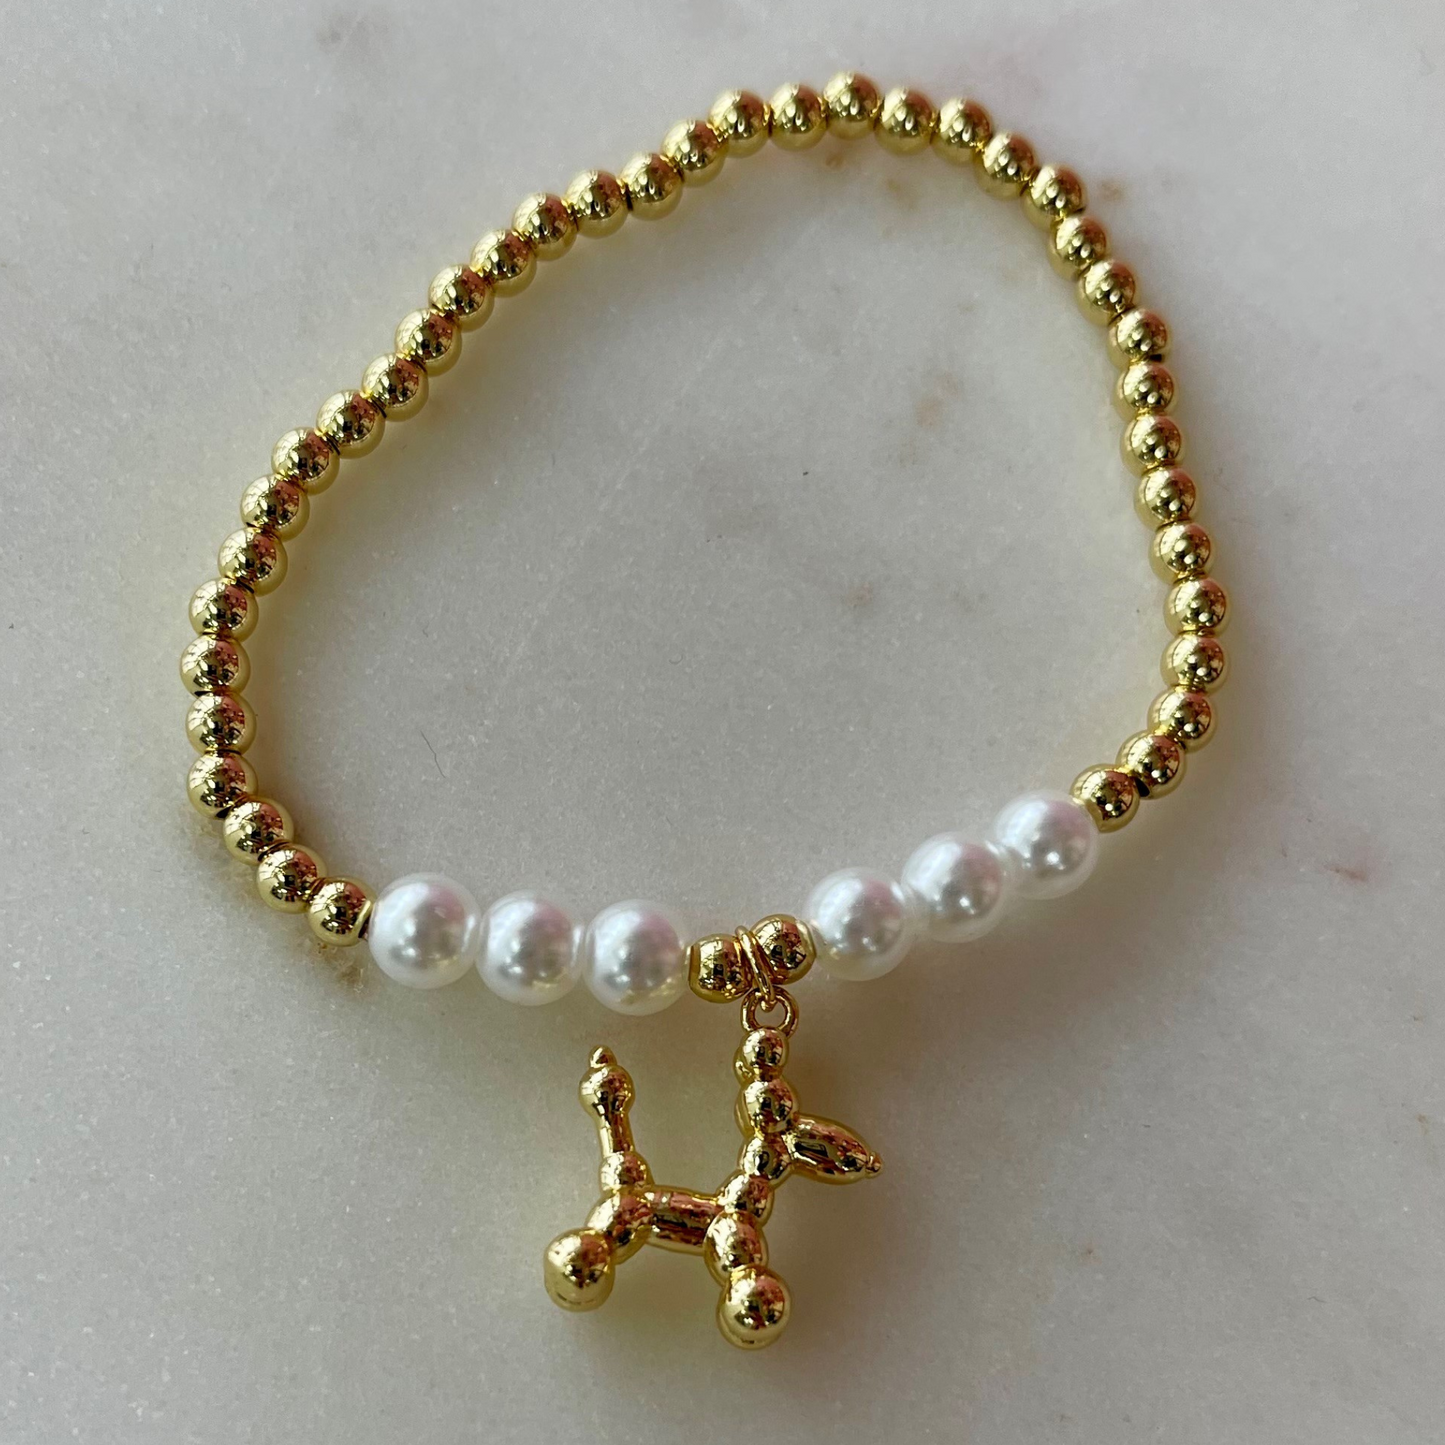 gold and pearl band bracelet with a gold balloon shaped dog